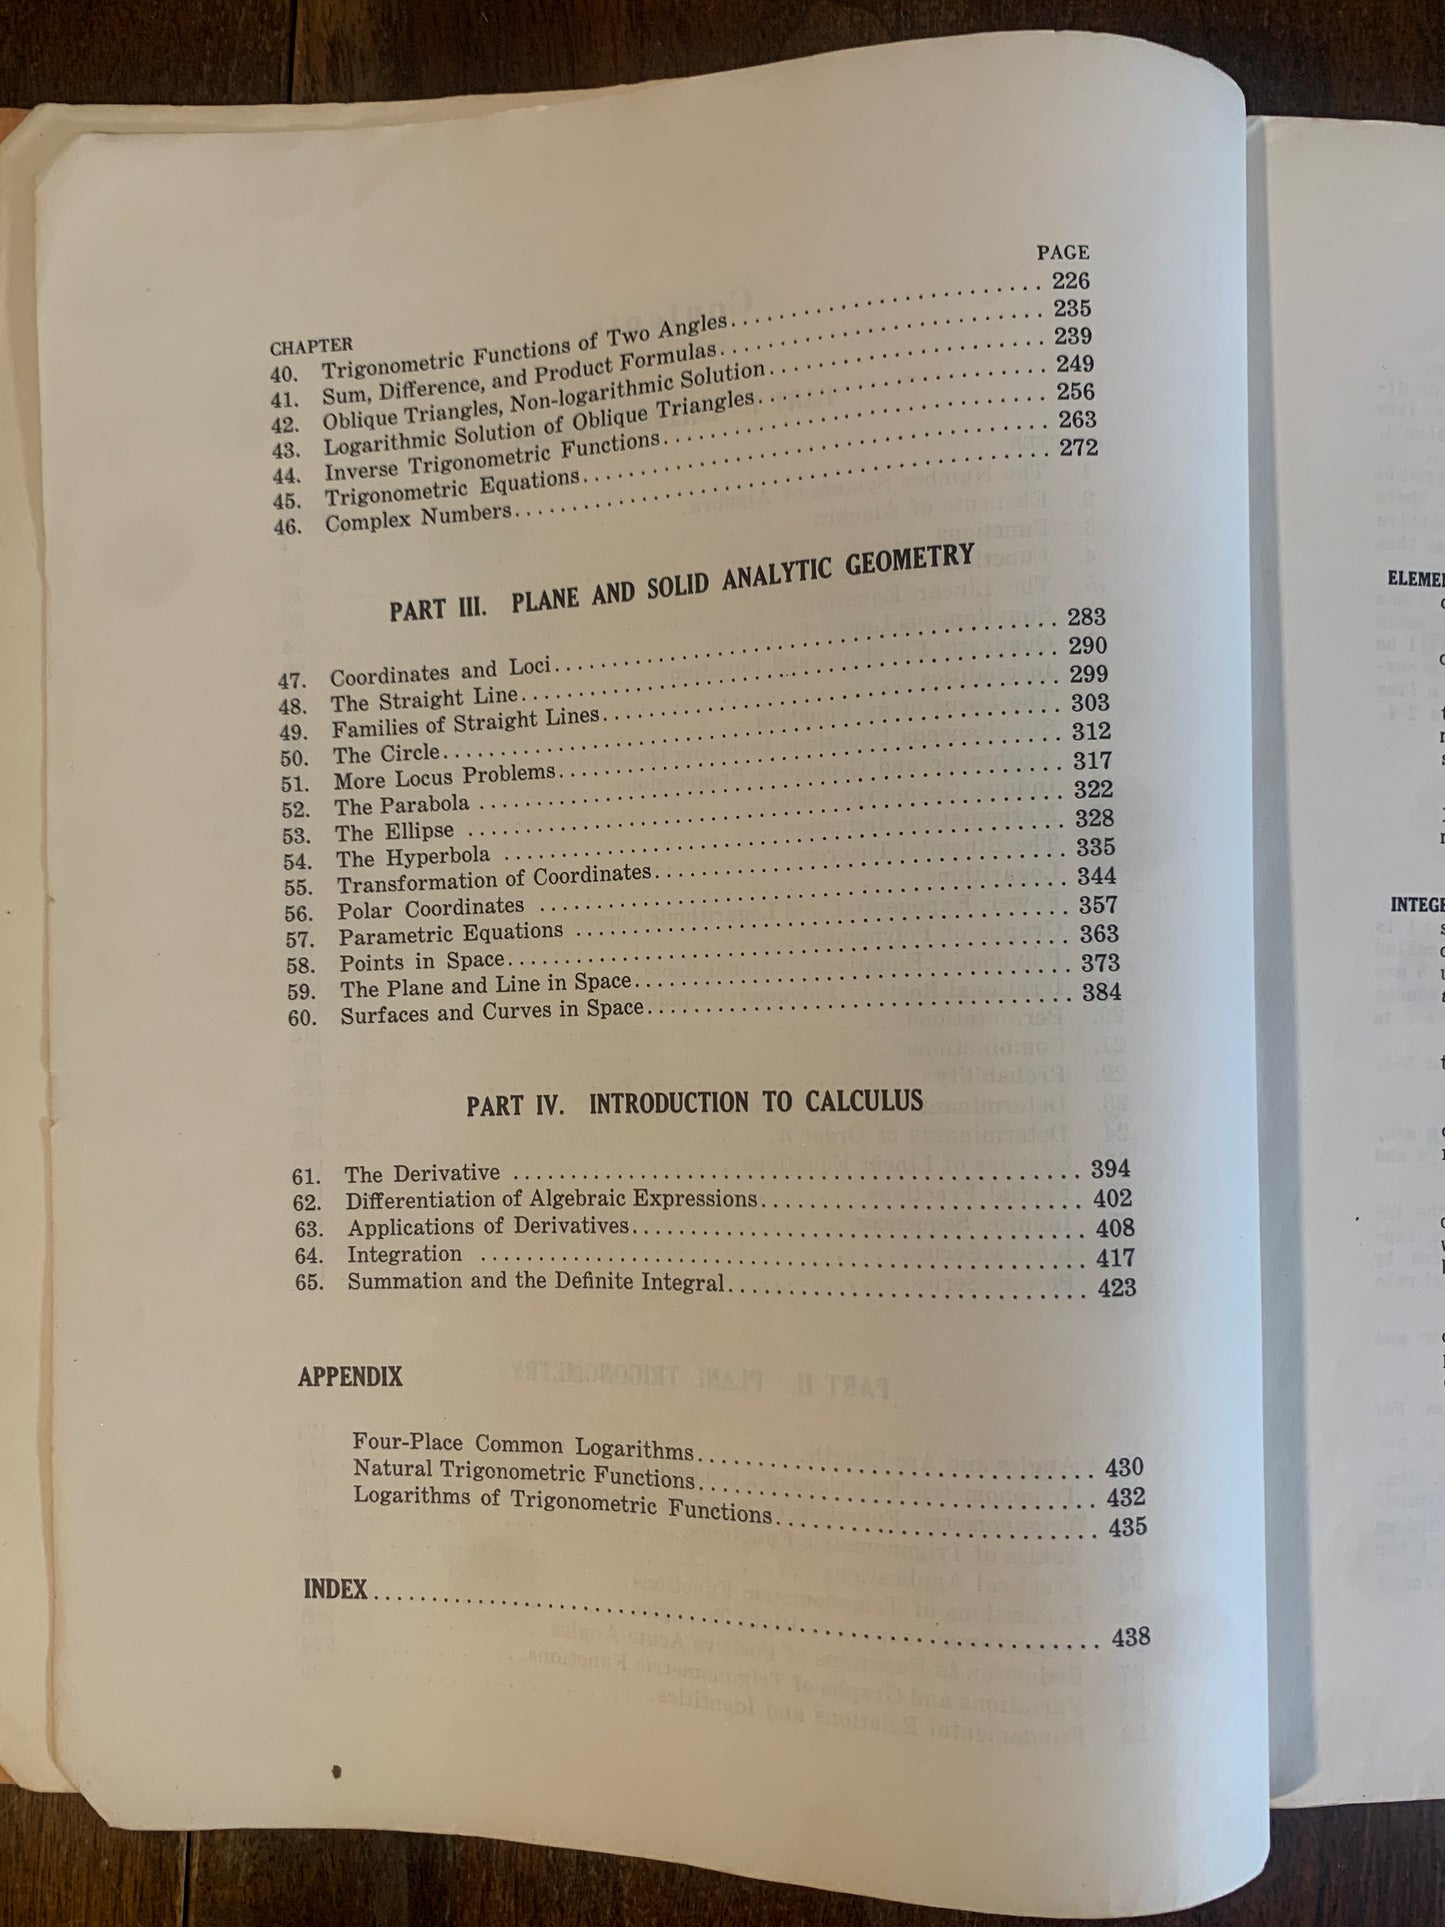 First Year College Mathematics by Frank Ayes JR. 1958